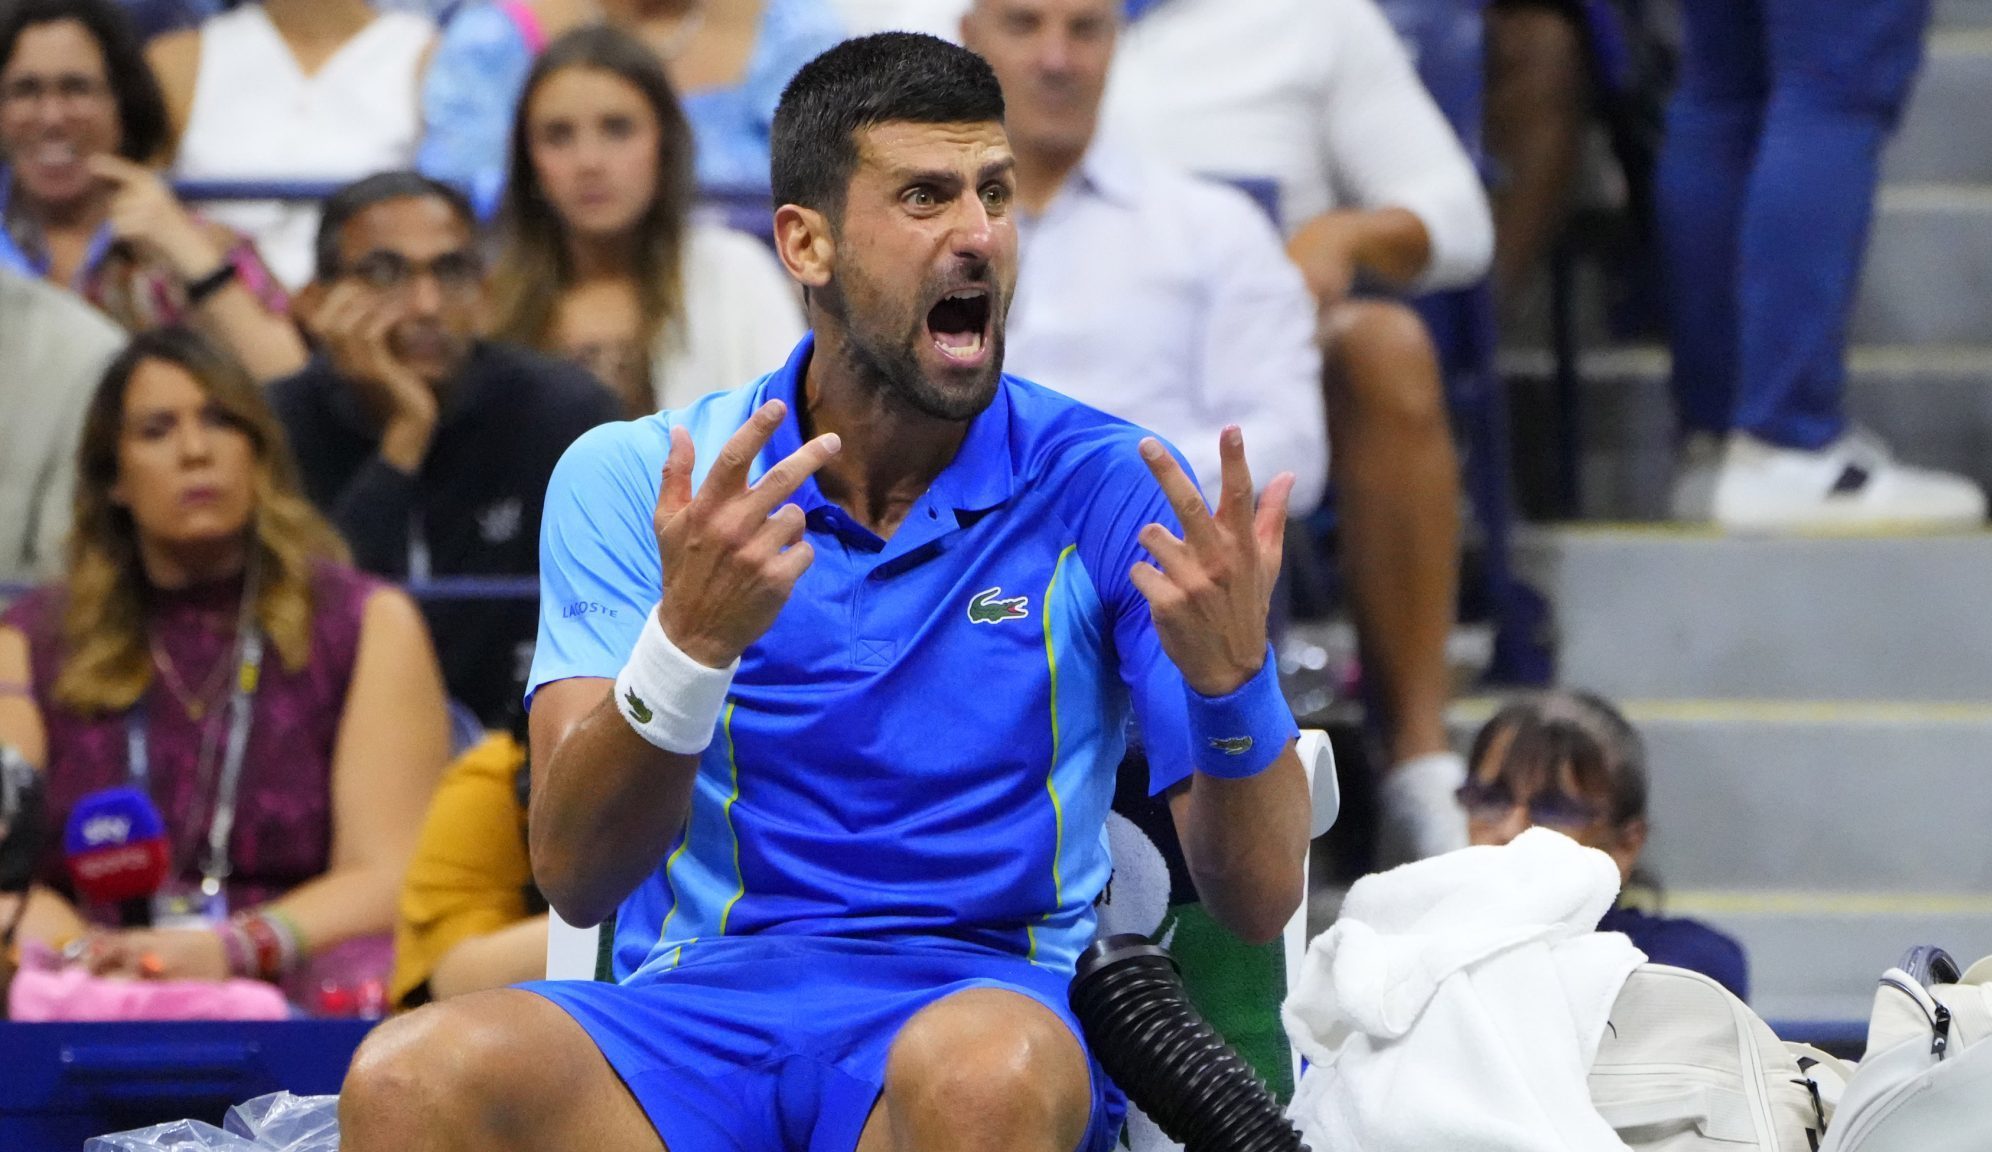 Sep 10, 2023; Flushing, NY, USA; Novak Djokovic of Serbia reacts towards his player's box during a changeover against Daniil Medvedev (not pictured) in the men's singles final on day fourteen of the 2023 U.S. Open tennis tournament at USTA Billie Jean King National Tennis Center.